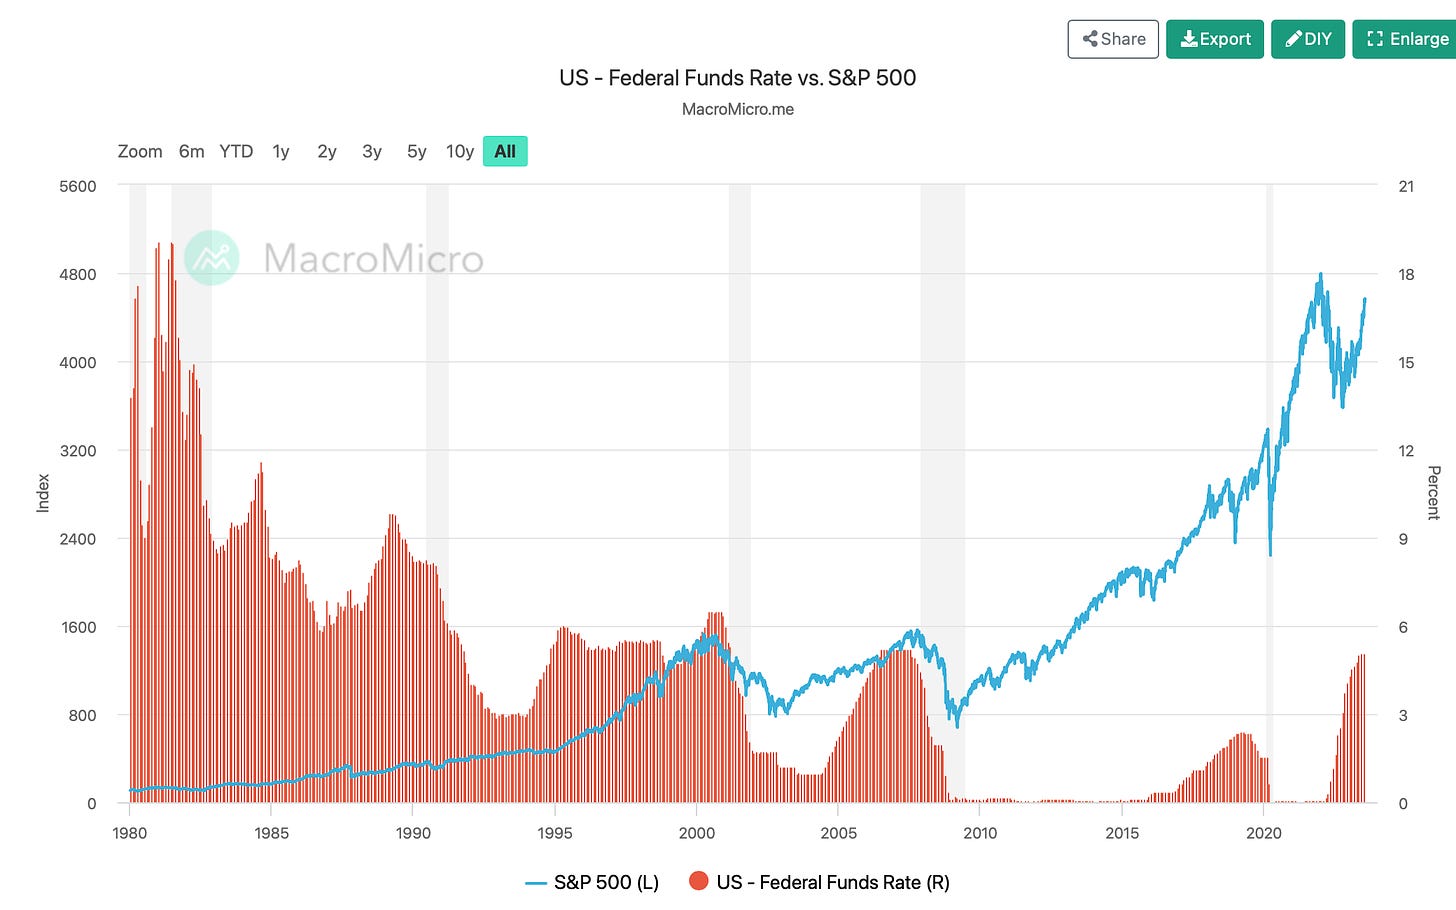 U.S. Federal Funds Rate vs. S&P 500